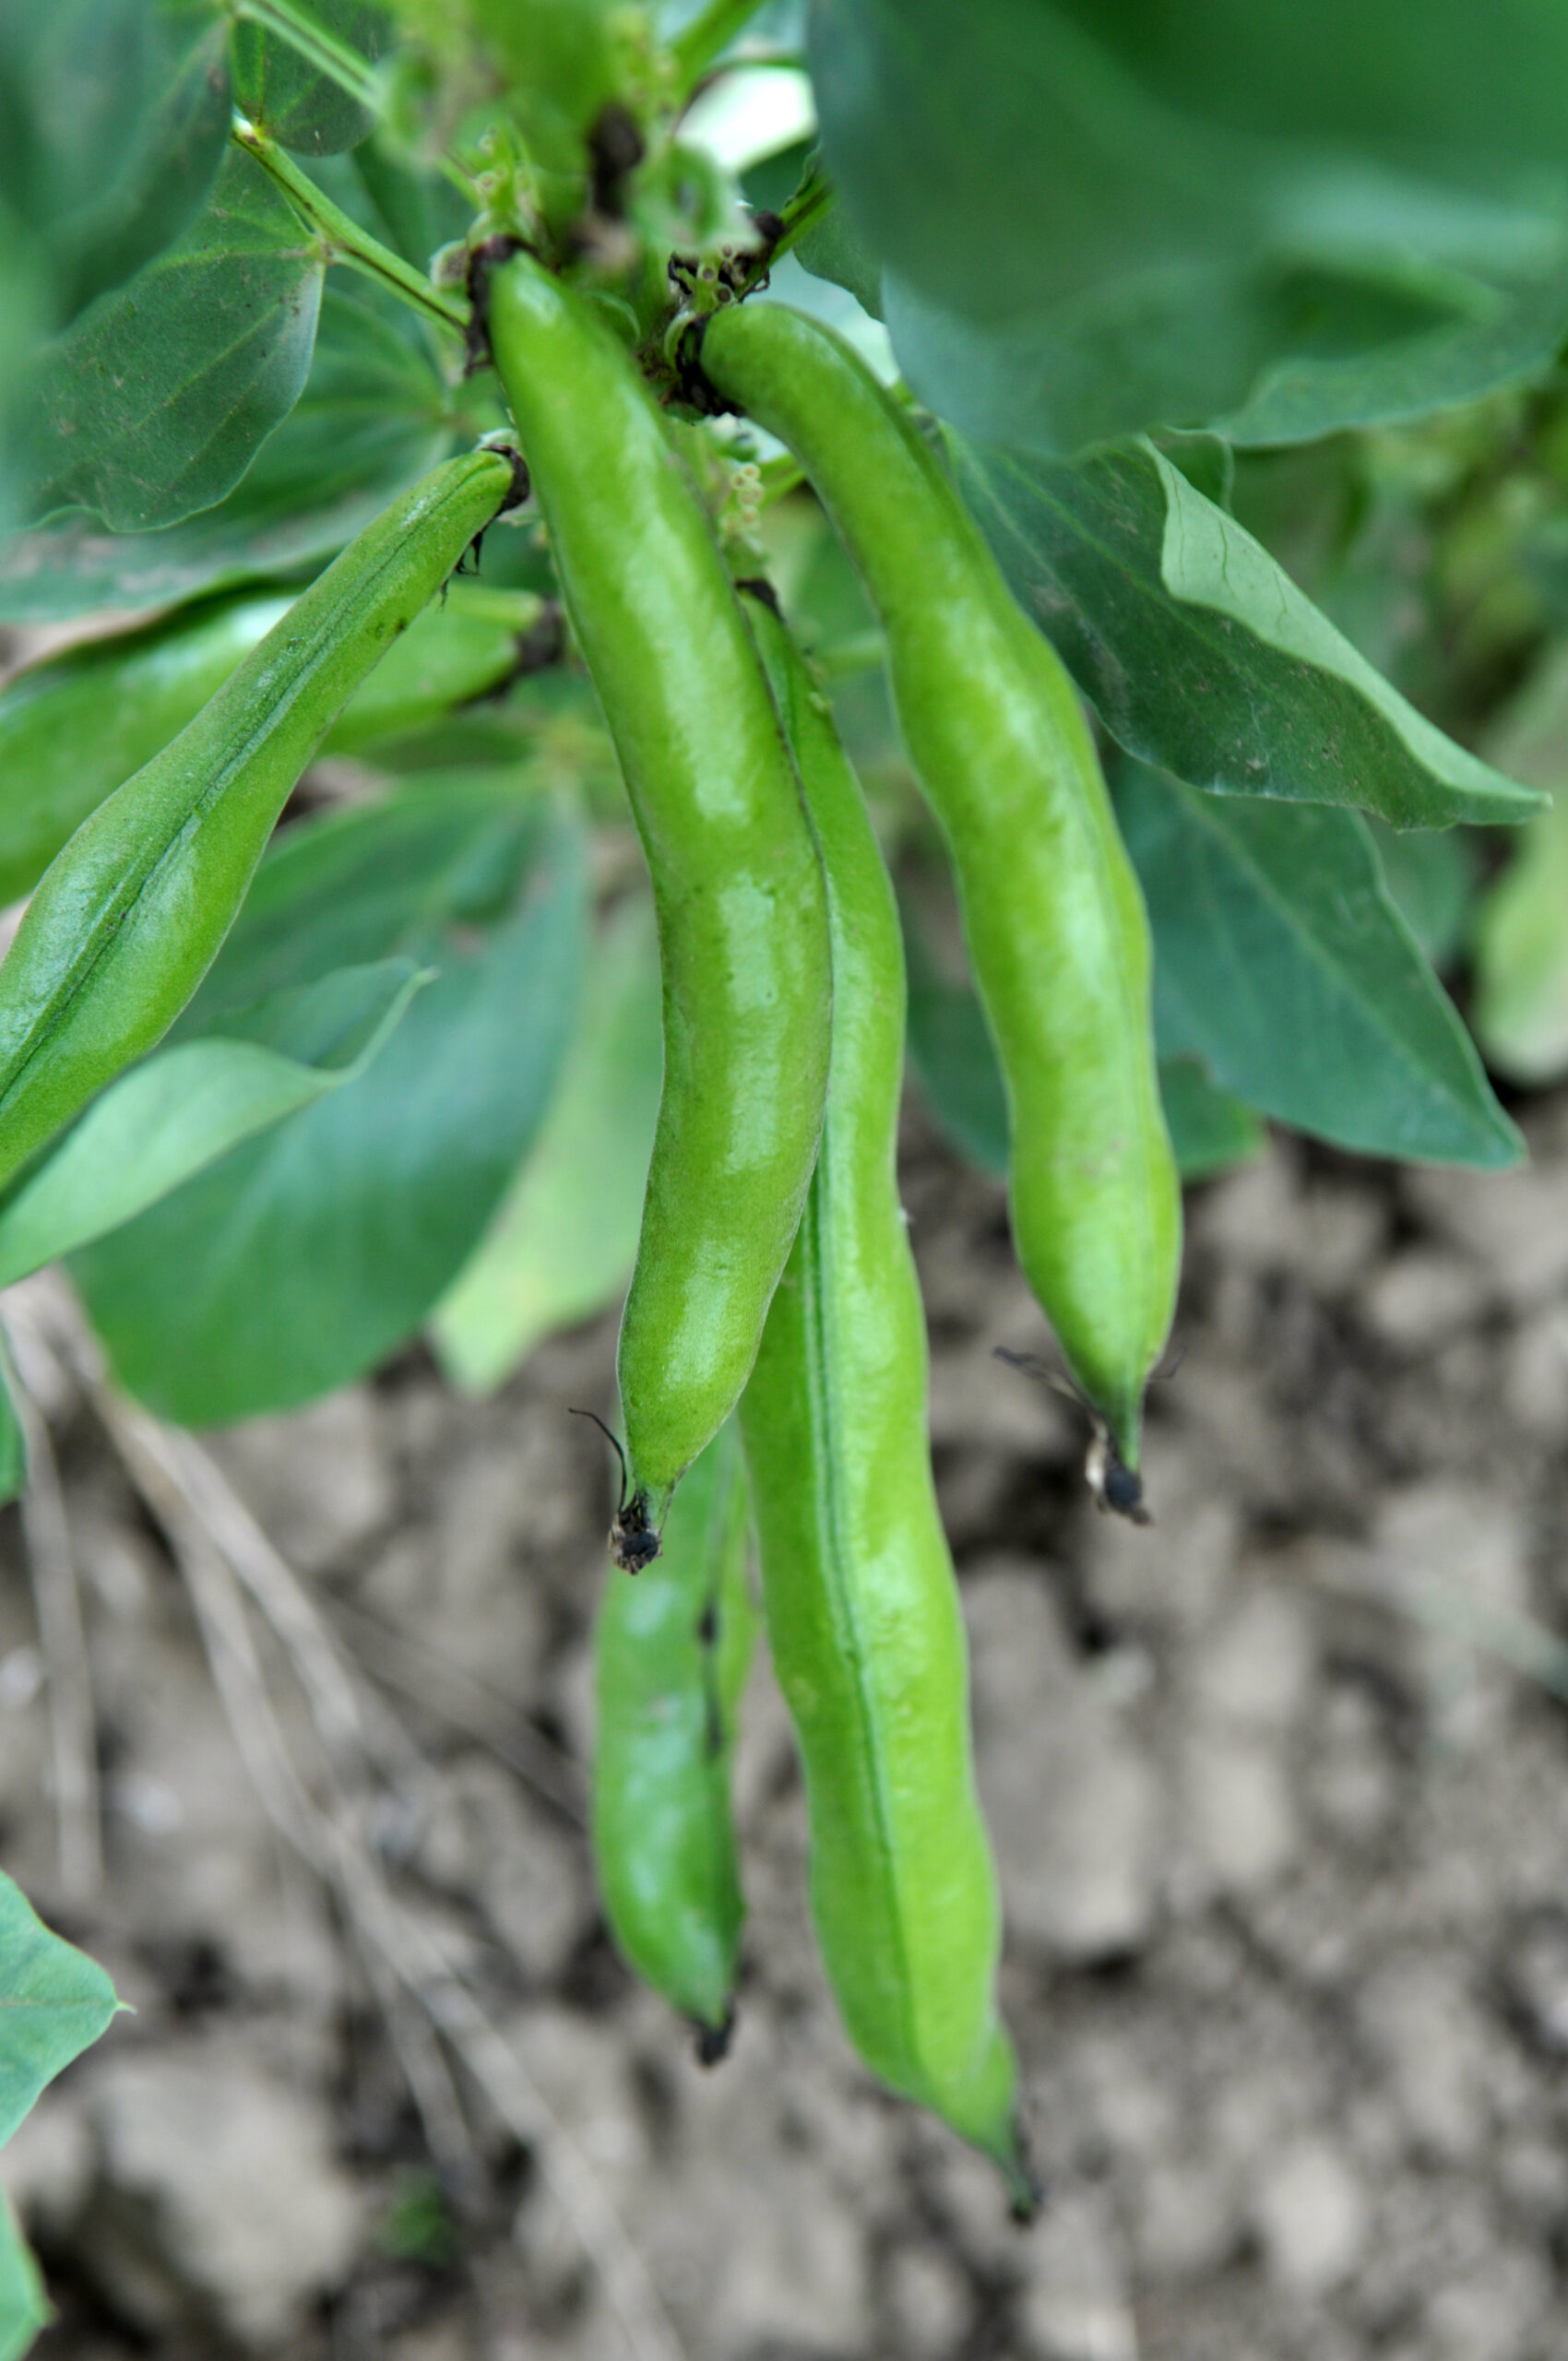 On the stem of the bean horse or ordinary (Vicia faba) ripen green pods - Want To Start Growing Your Own Food? The Best Plants To Start With